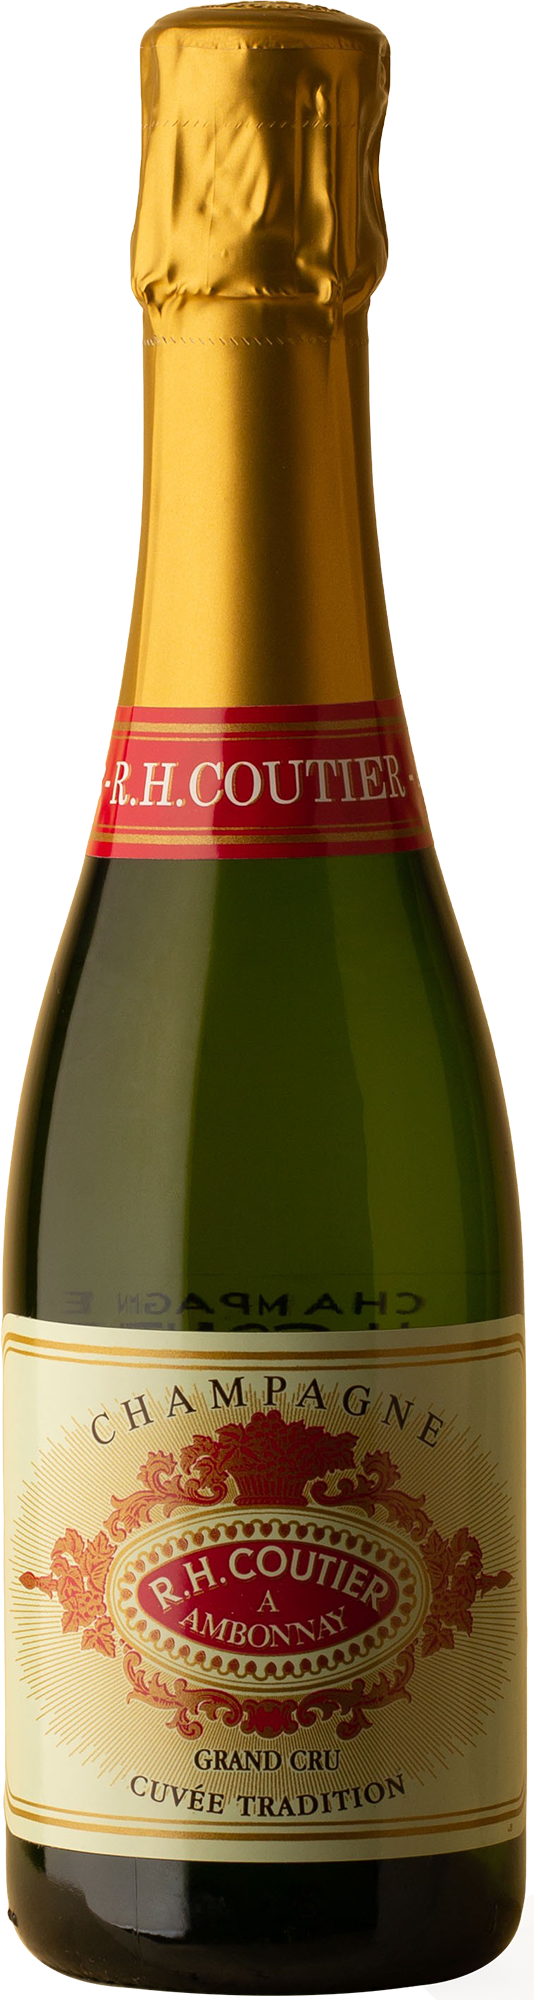 R.H Coutier - Ambonnay Brut Cuvée Tradition 375mL NV Sparkling Wine